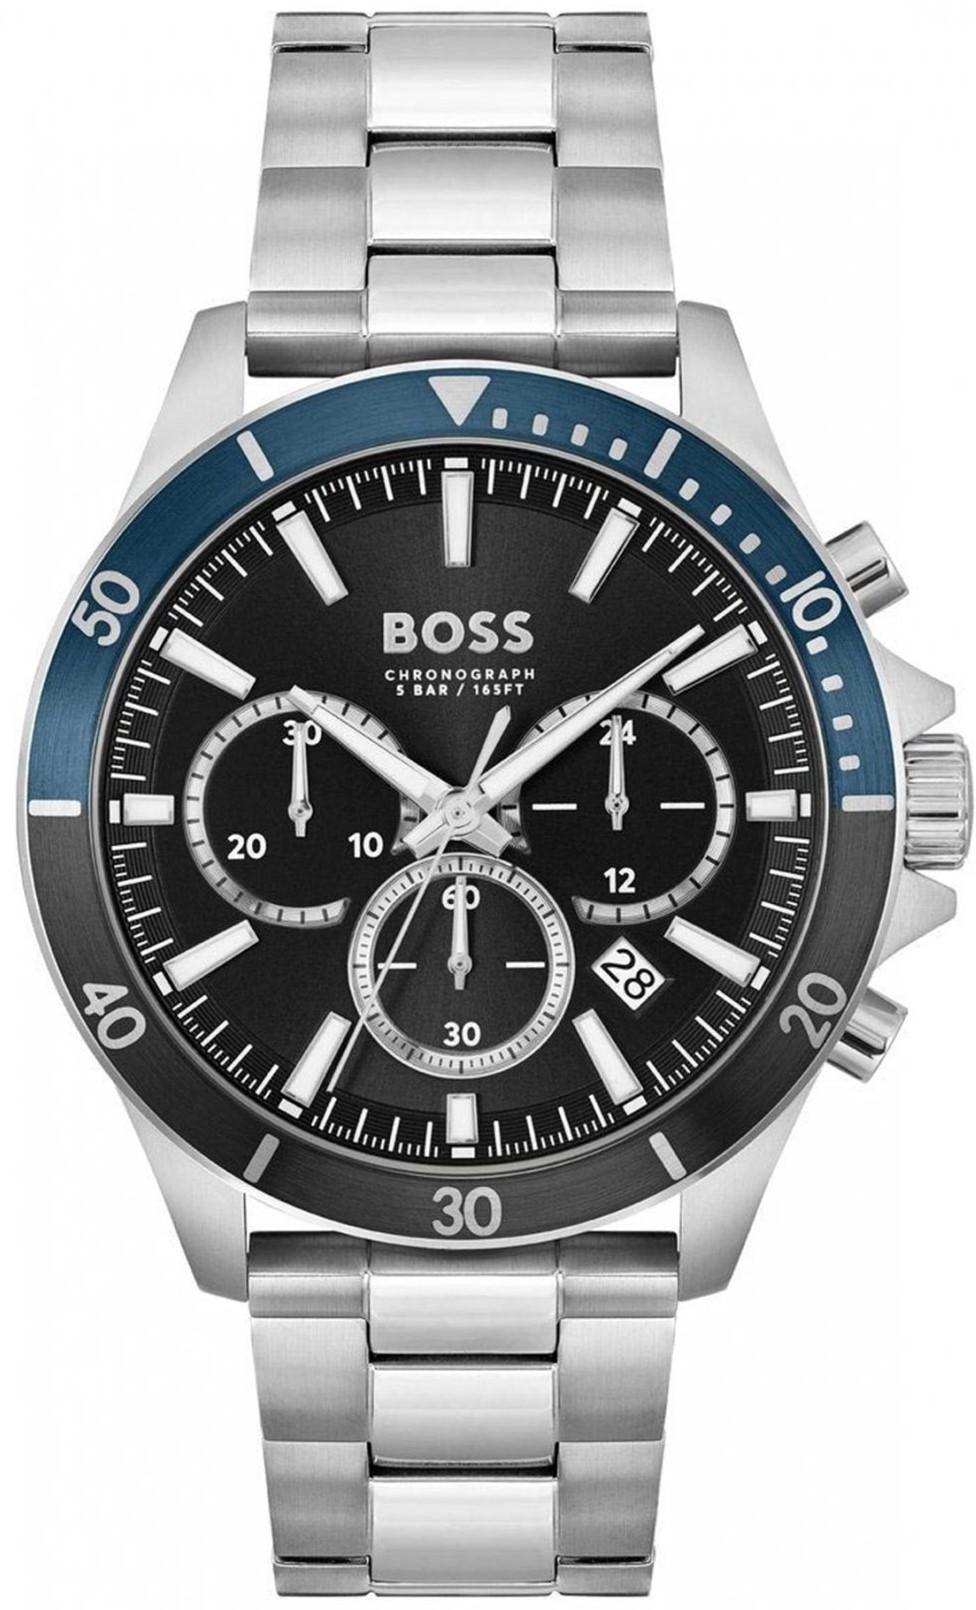 boss troper chronograph 1514101 silver case with stainless steel bracelet image1 1